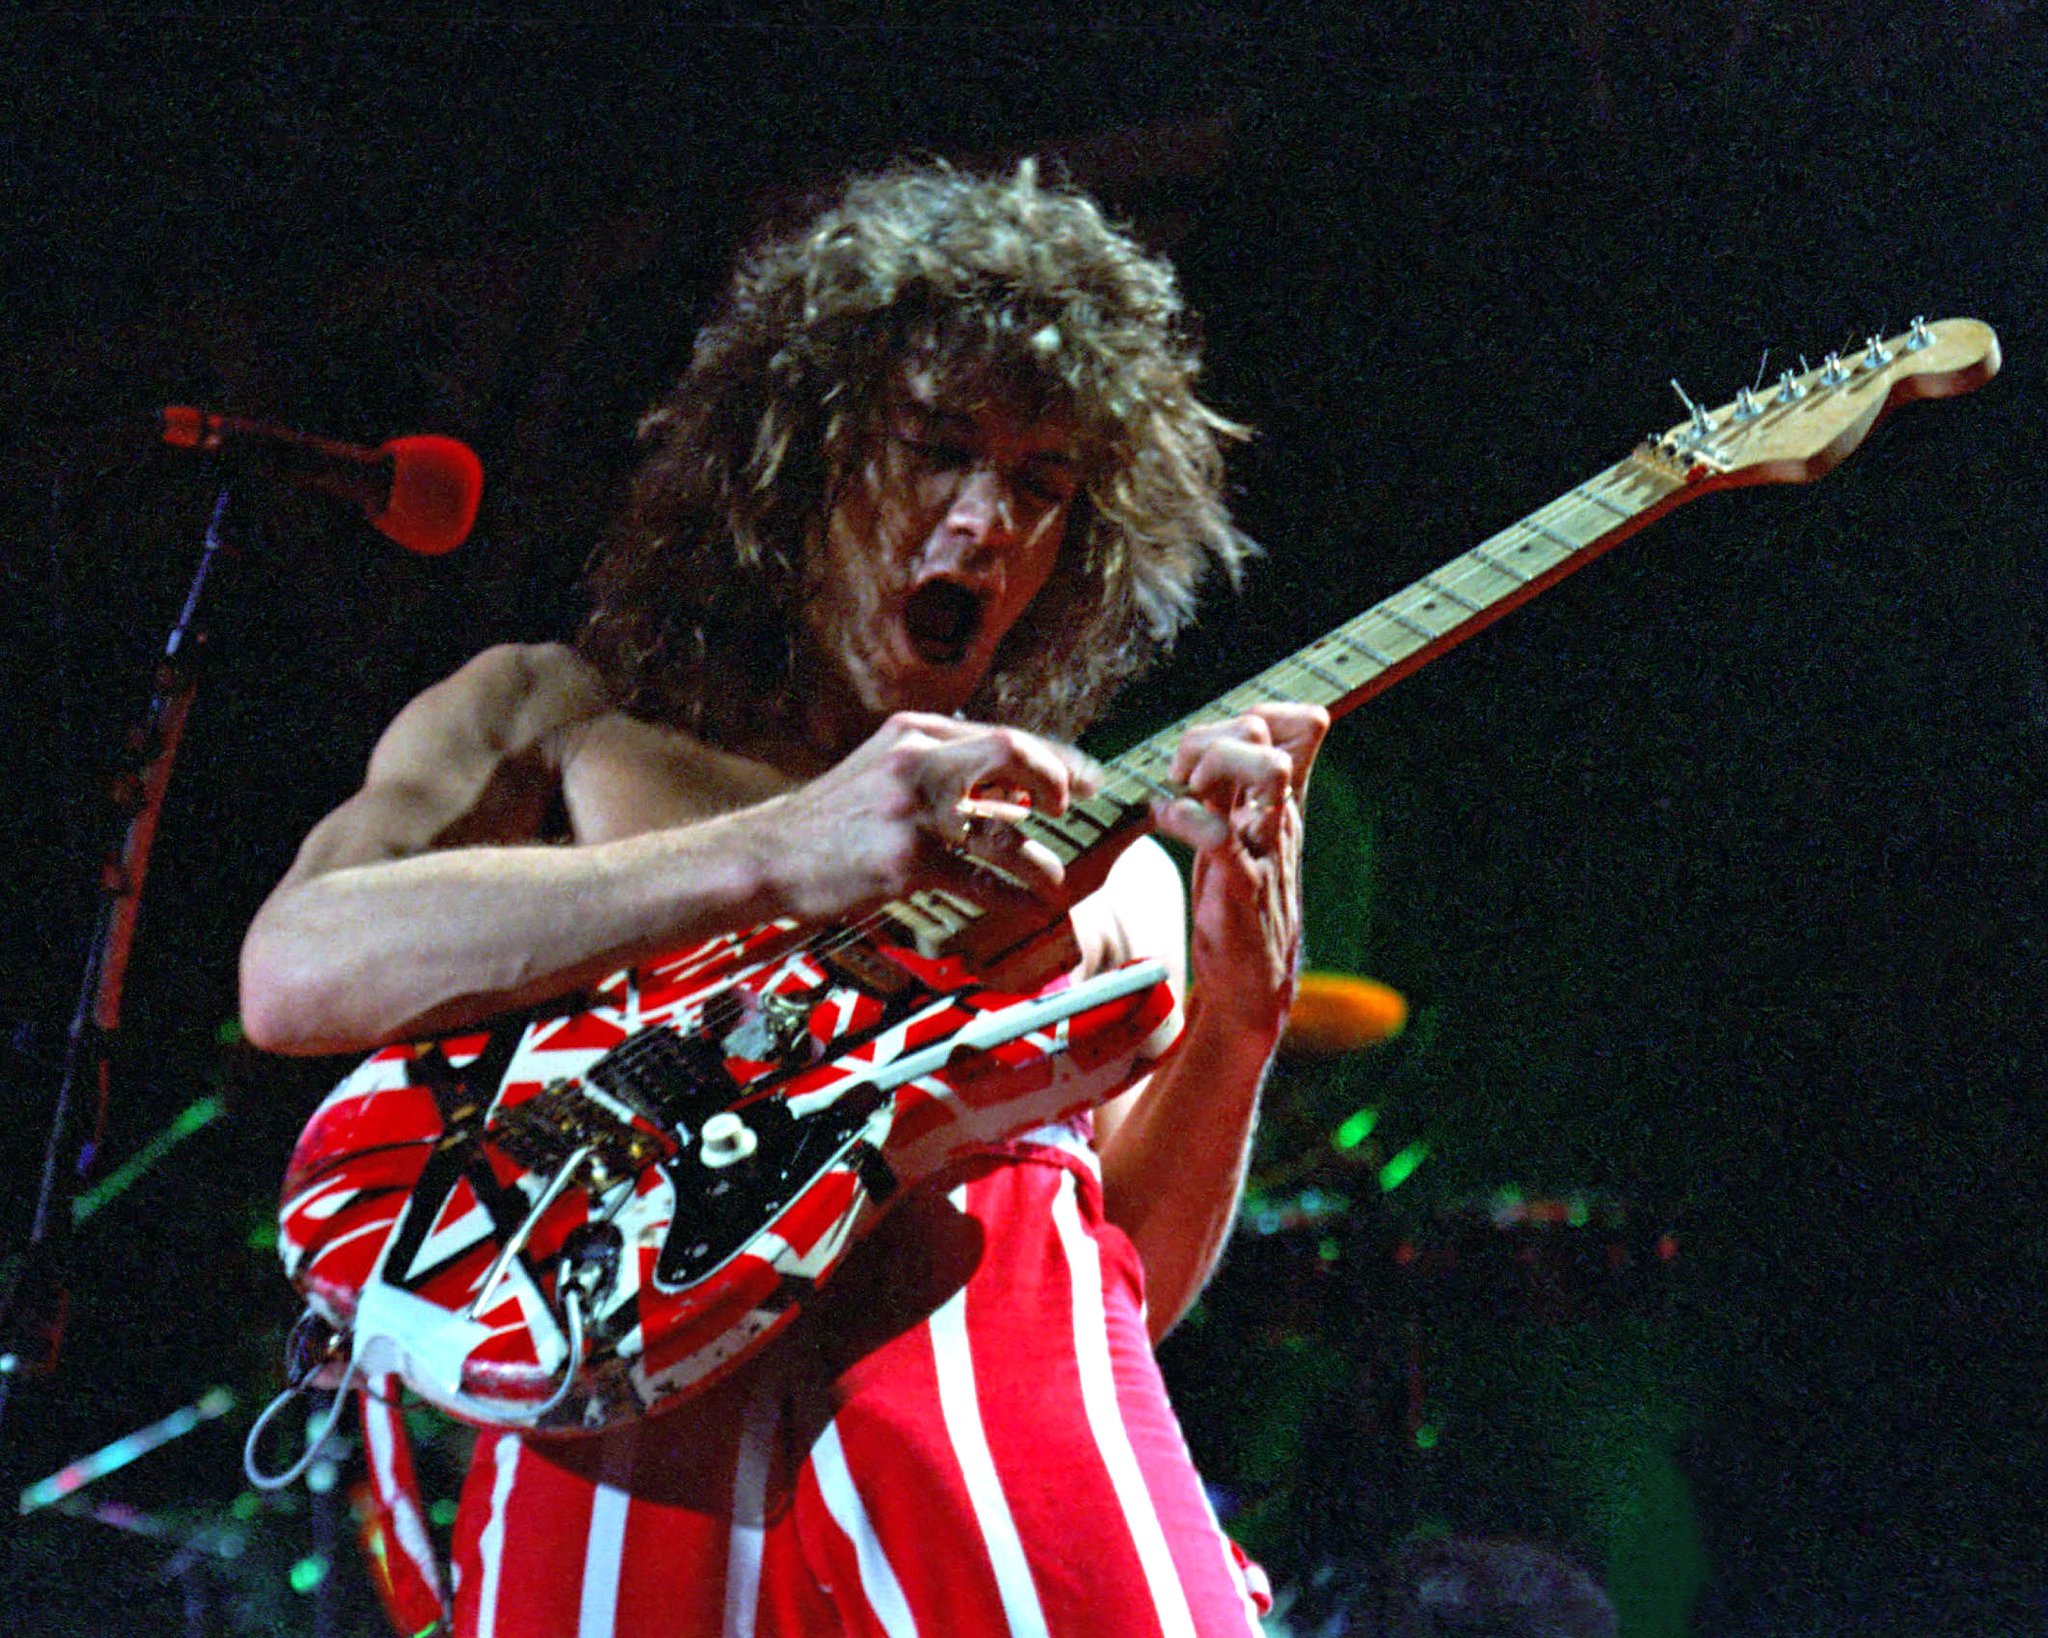 Eddie Van Halen's Iconic Guitars Sell for $422,000 at Legend-Studded Auction